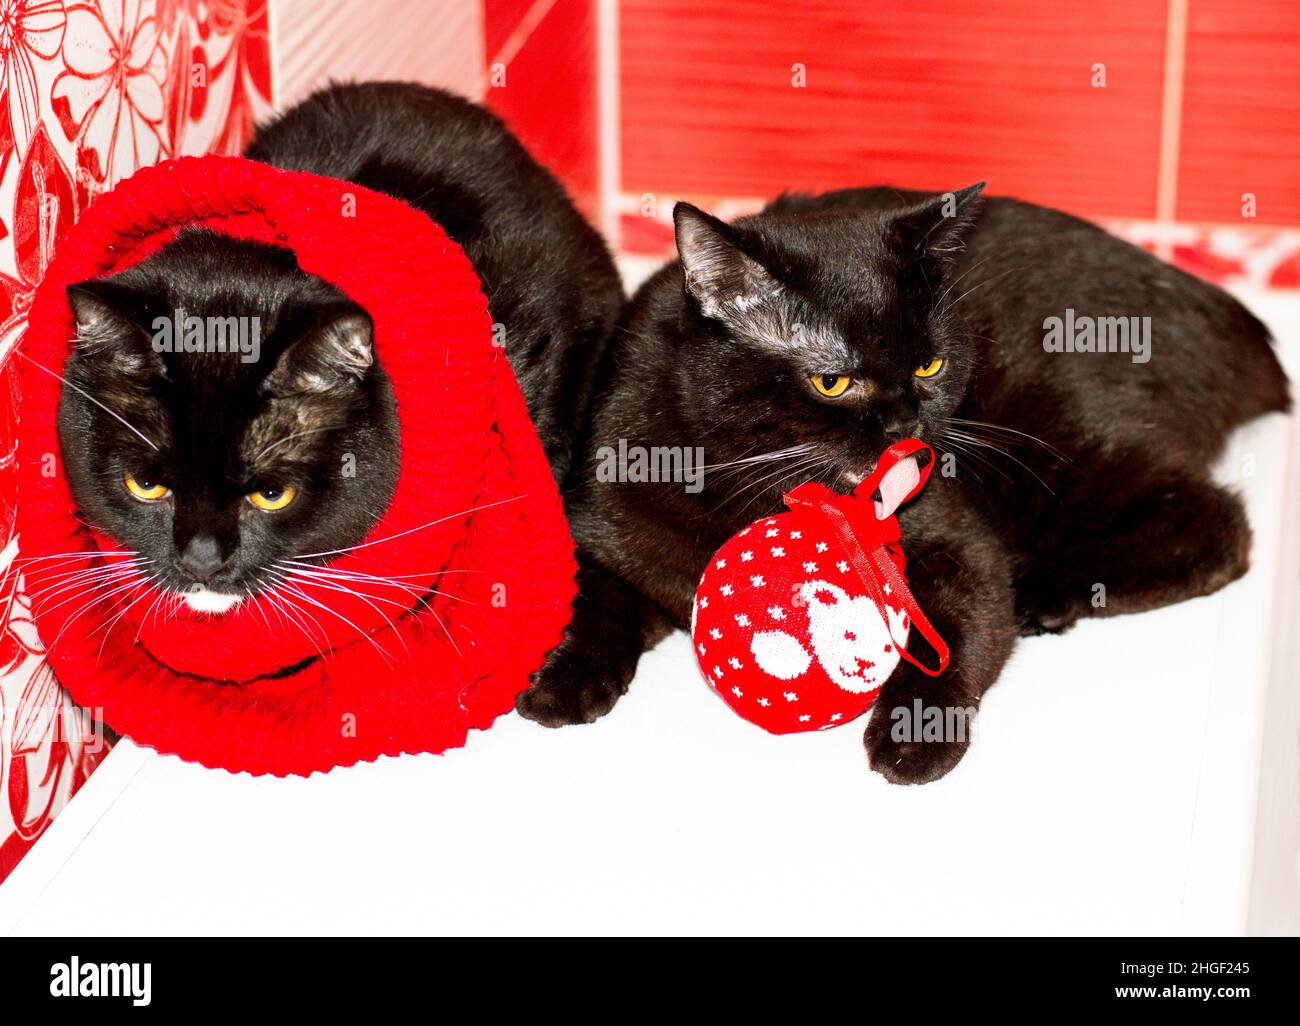 two dark Scottish British cats with a red Christmas toy on a red background, winter is cold, the theme is cats, kittens and cats in the house, pets th Stock Photo